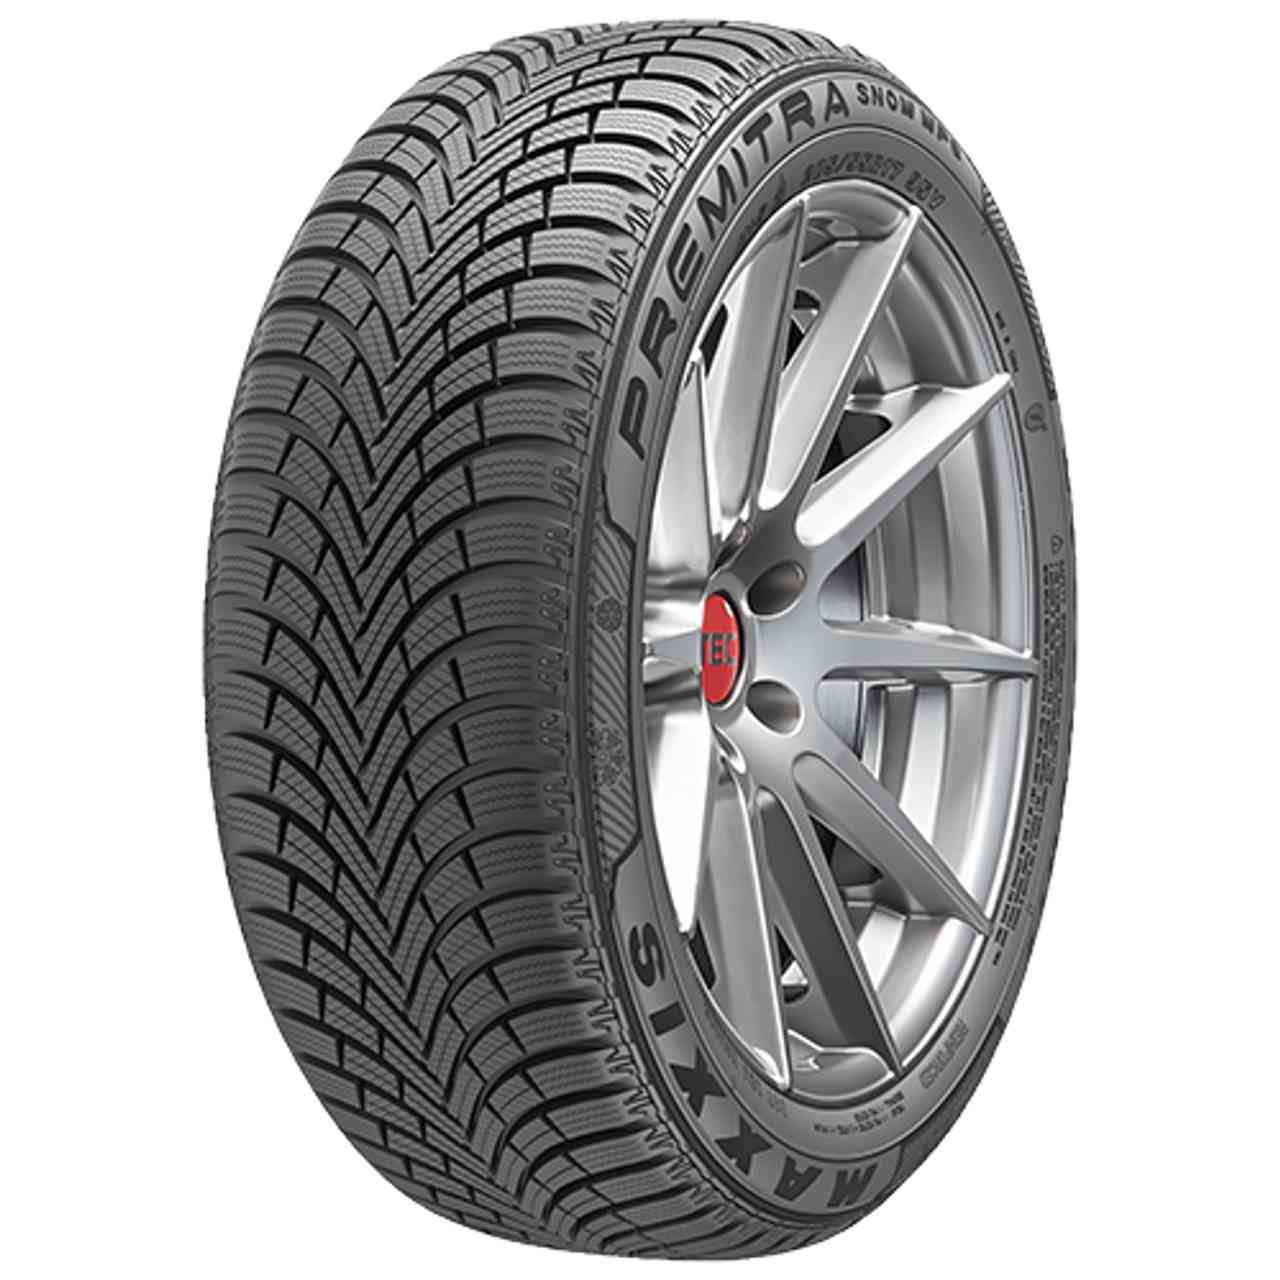 MAXXIS PREMITRA SNOW WP6 215/60R16 99H BSW von MAXXIS